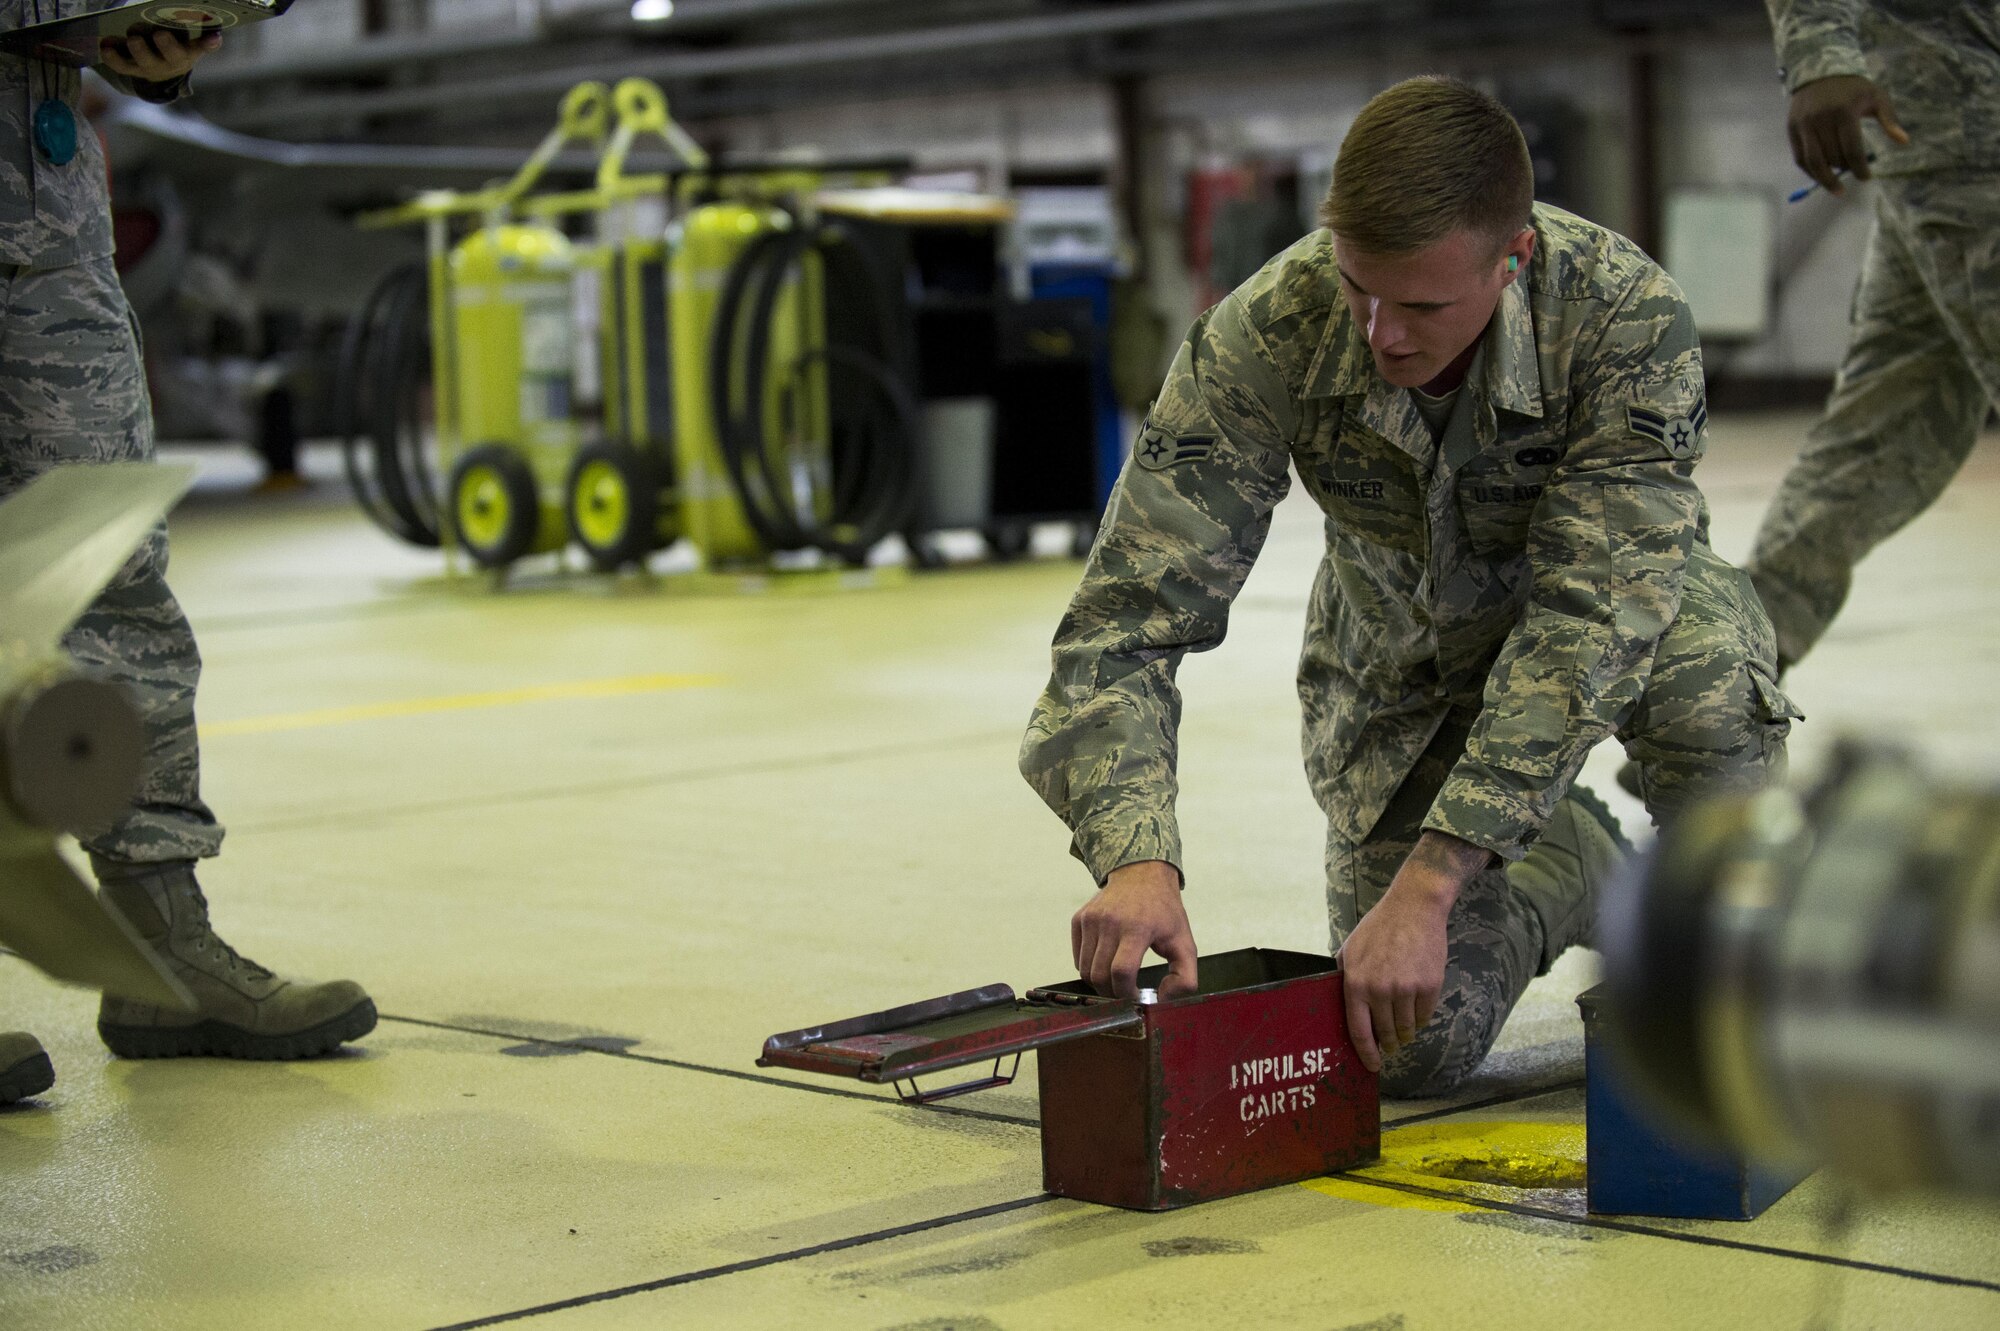 U.S. Air Force Airman 1st Class Austin Winker, 52nd Aircraft Maintenance Squadron weapons load crew member, identifies parts before loading inert weapons during the quarterly weapons load competition in Hangar One at Spangdahlem Air Base, Germany, Nov. 10, 2016. Family, friends and coworkers watched as two teams competed against each other for a spot in the annual load competition. (U.S. Air Force photo by Airman 1st Class Preston Cherry)